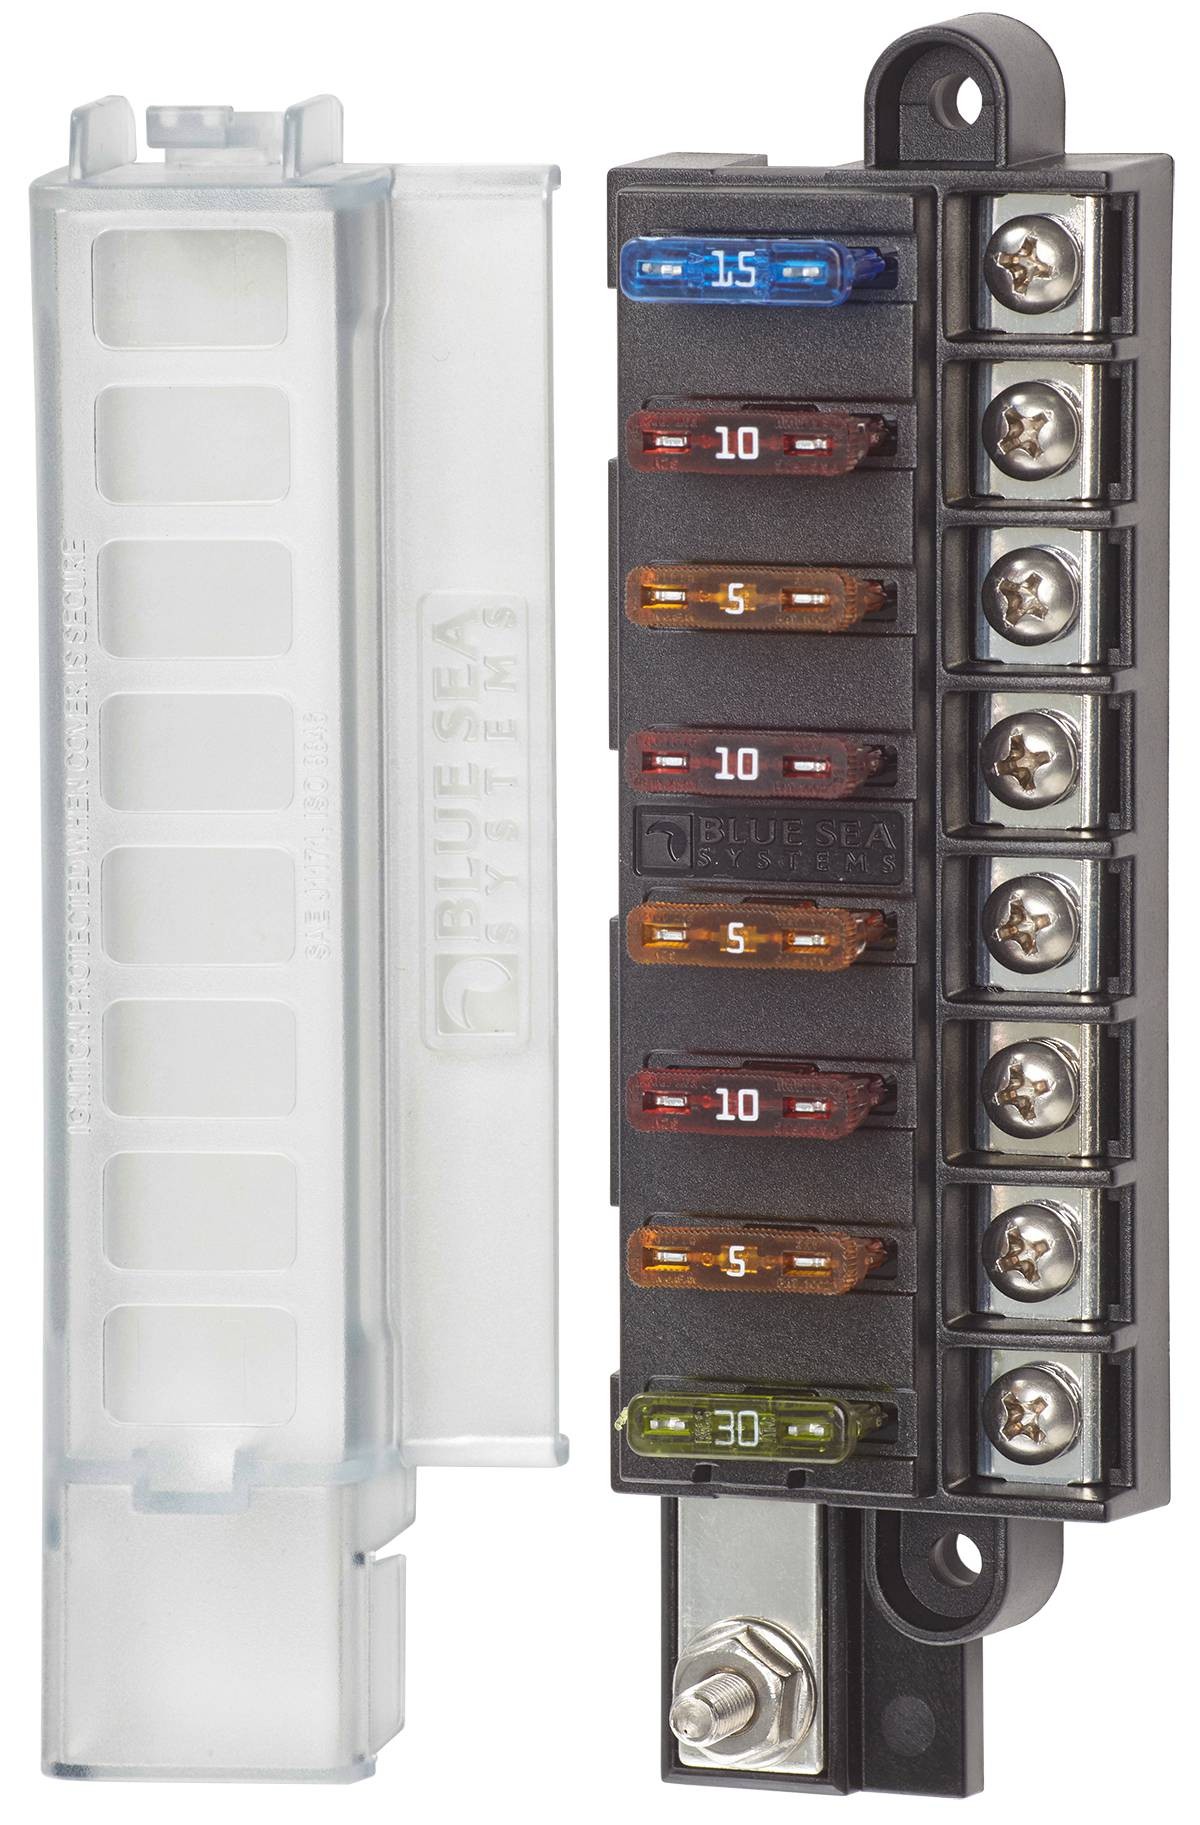 4x4 Outdoor Tuning    Bluesea Fuse Box With Cover For 8